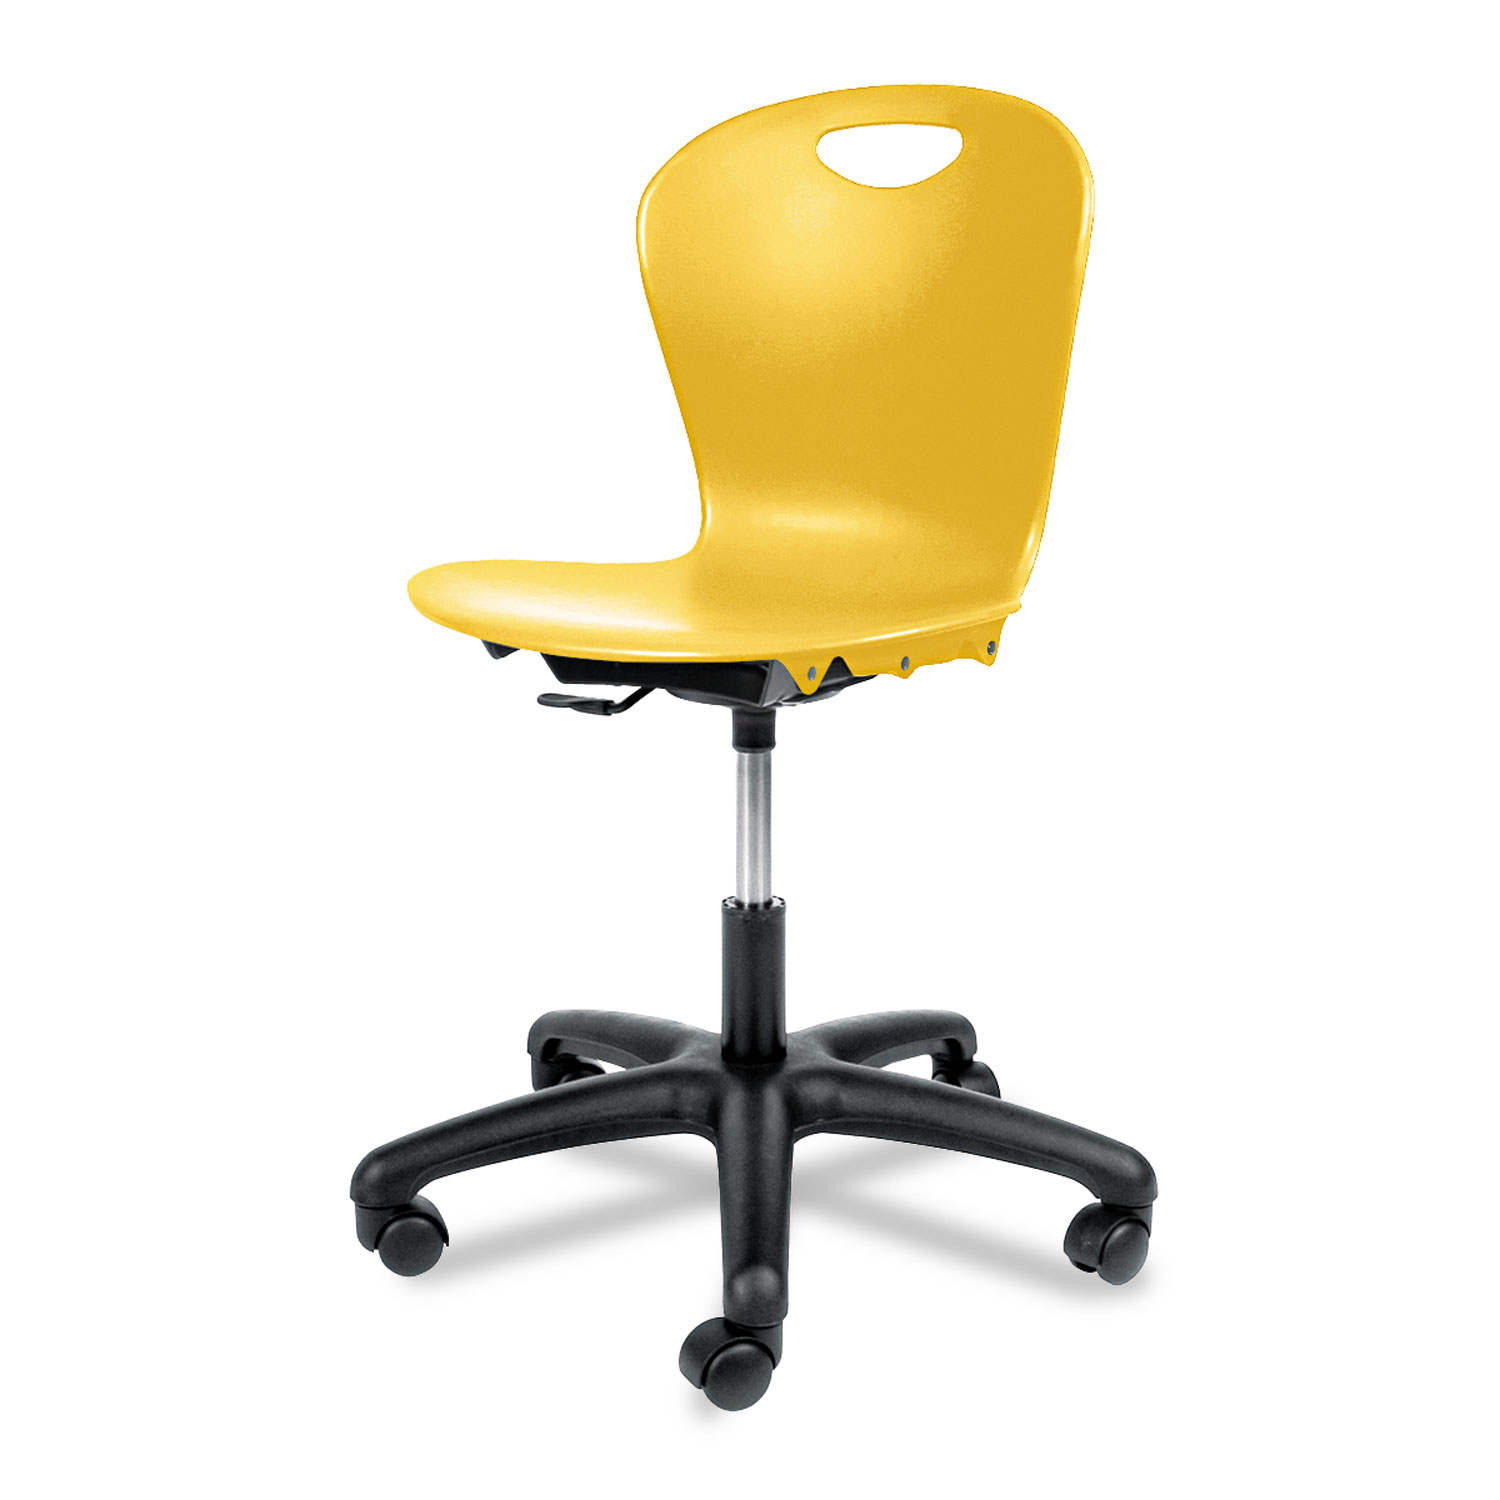 Adjustable-Height Task Chair, 24-1/8w x 24-1/8d x 3034-1/2h, Squash